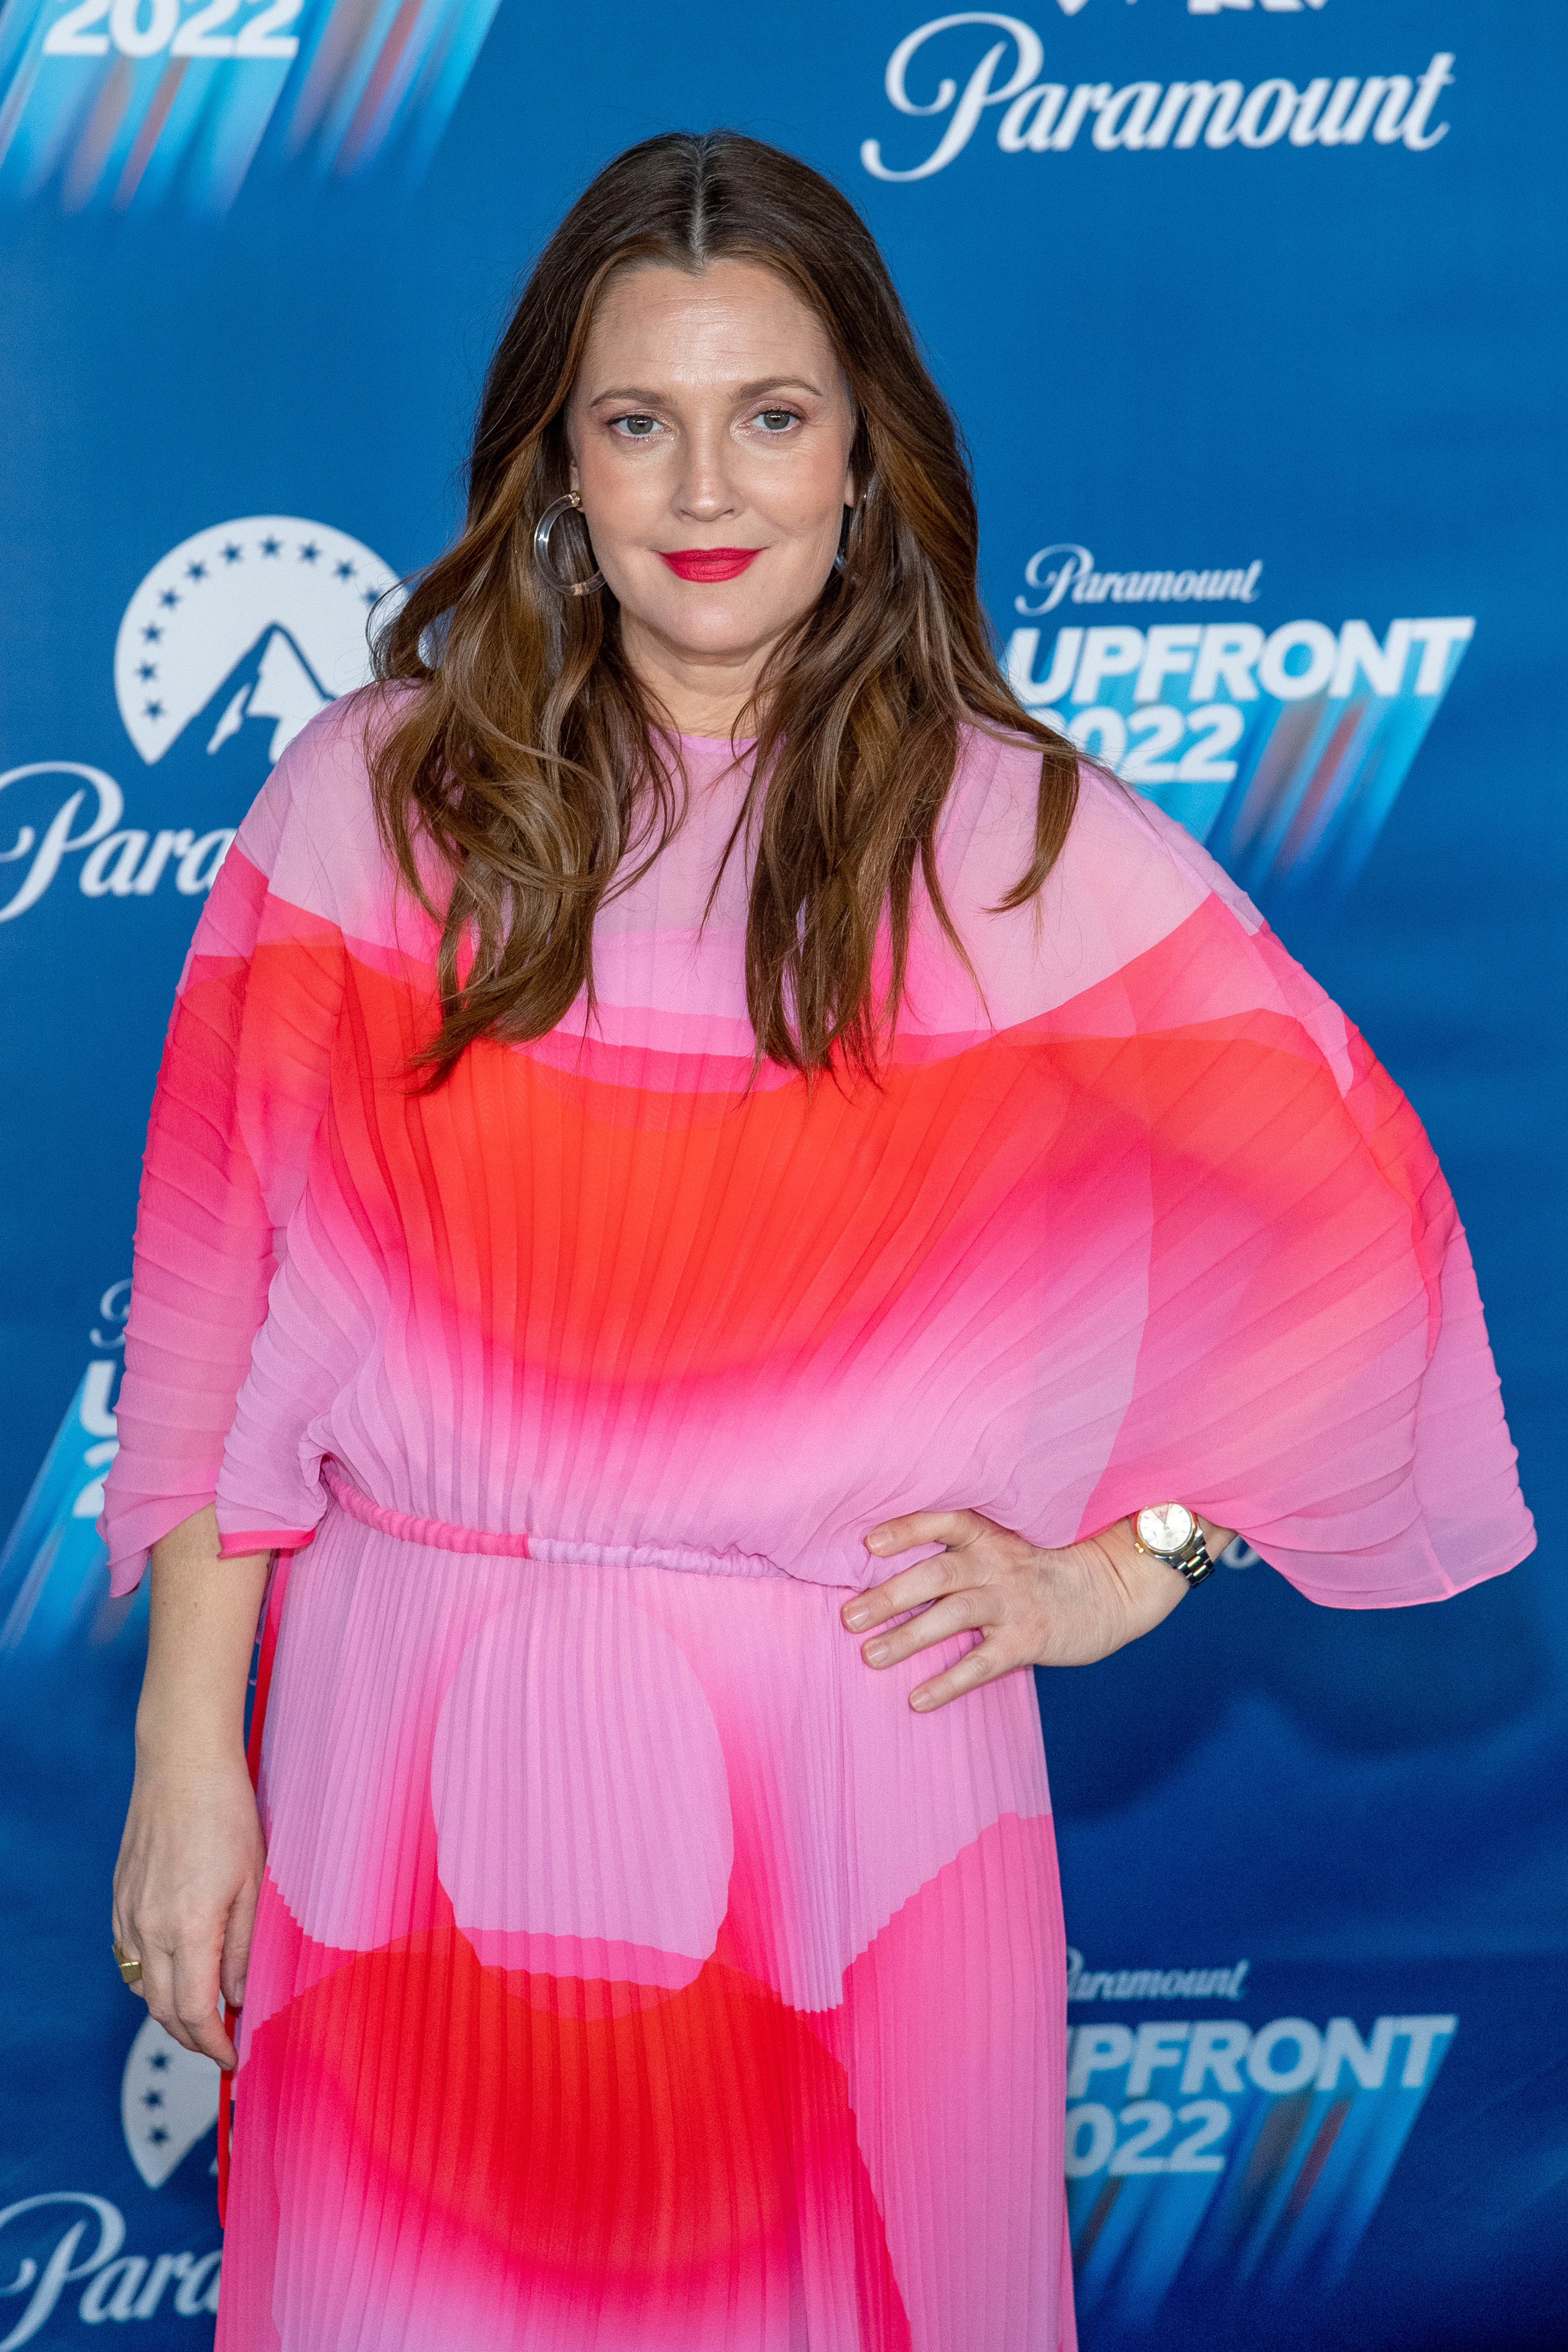 Drew with her hand hand on hip as she poses for photos at a red carpet event